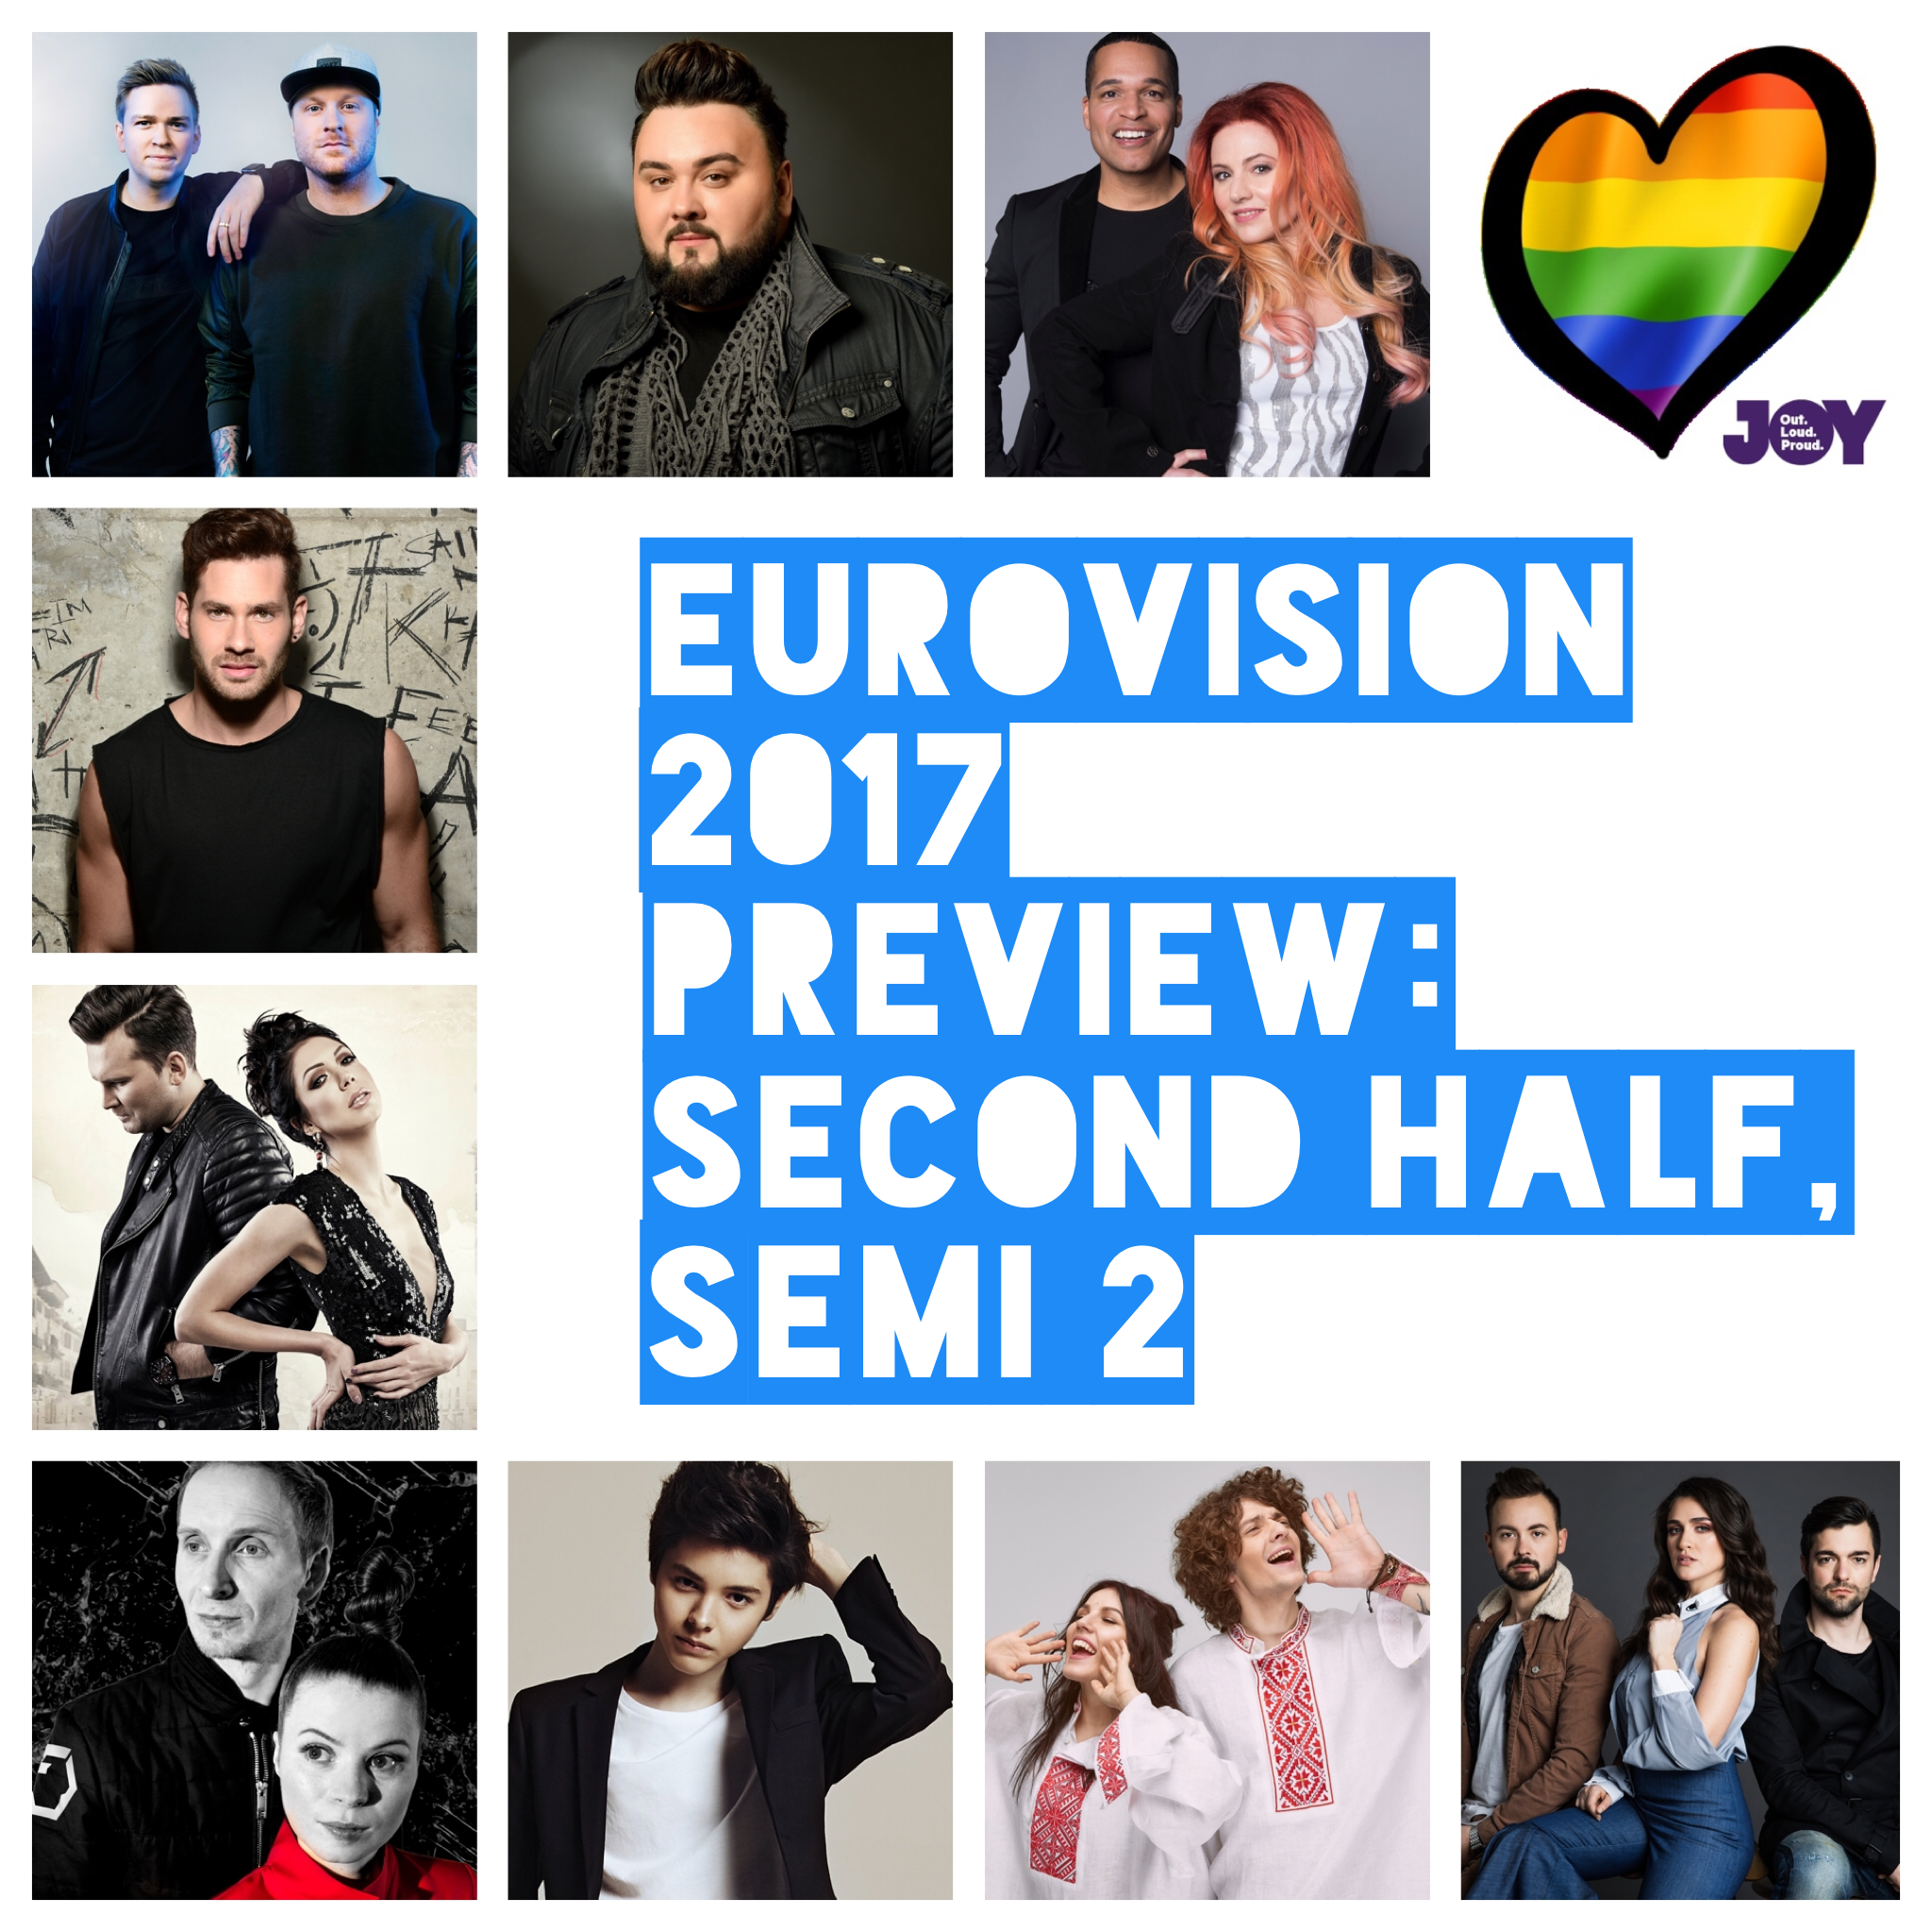 Lost and Alive in the Spirit of the Moment: Eurovision 2017 Preview – Second Half of Semi 2